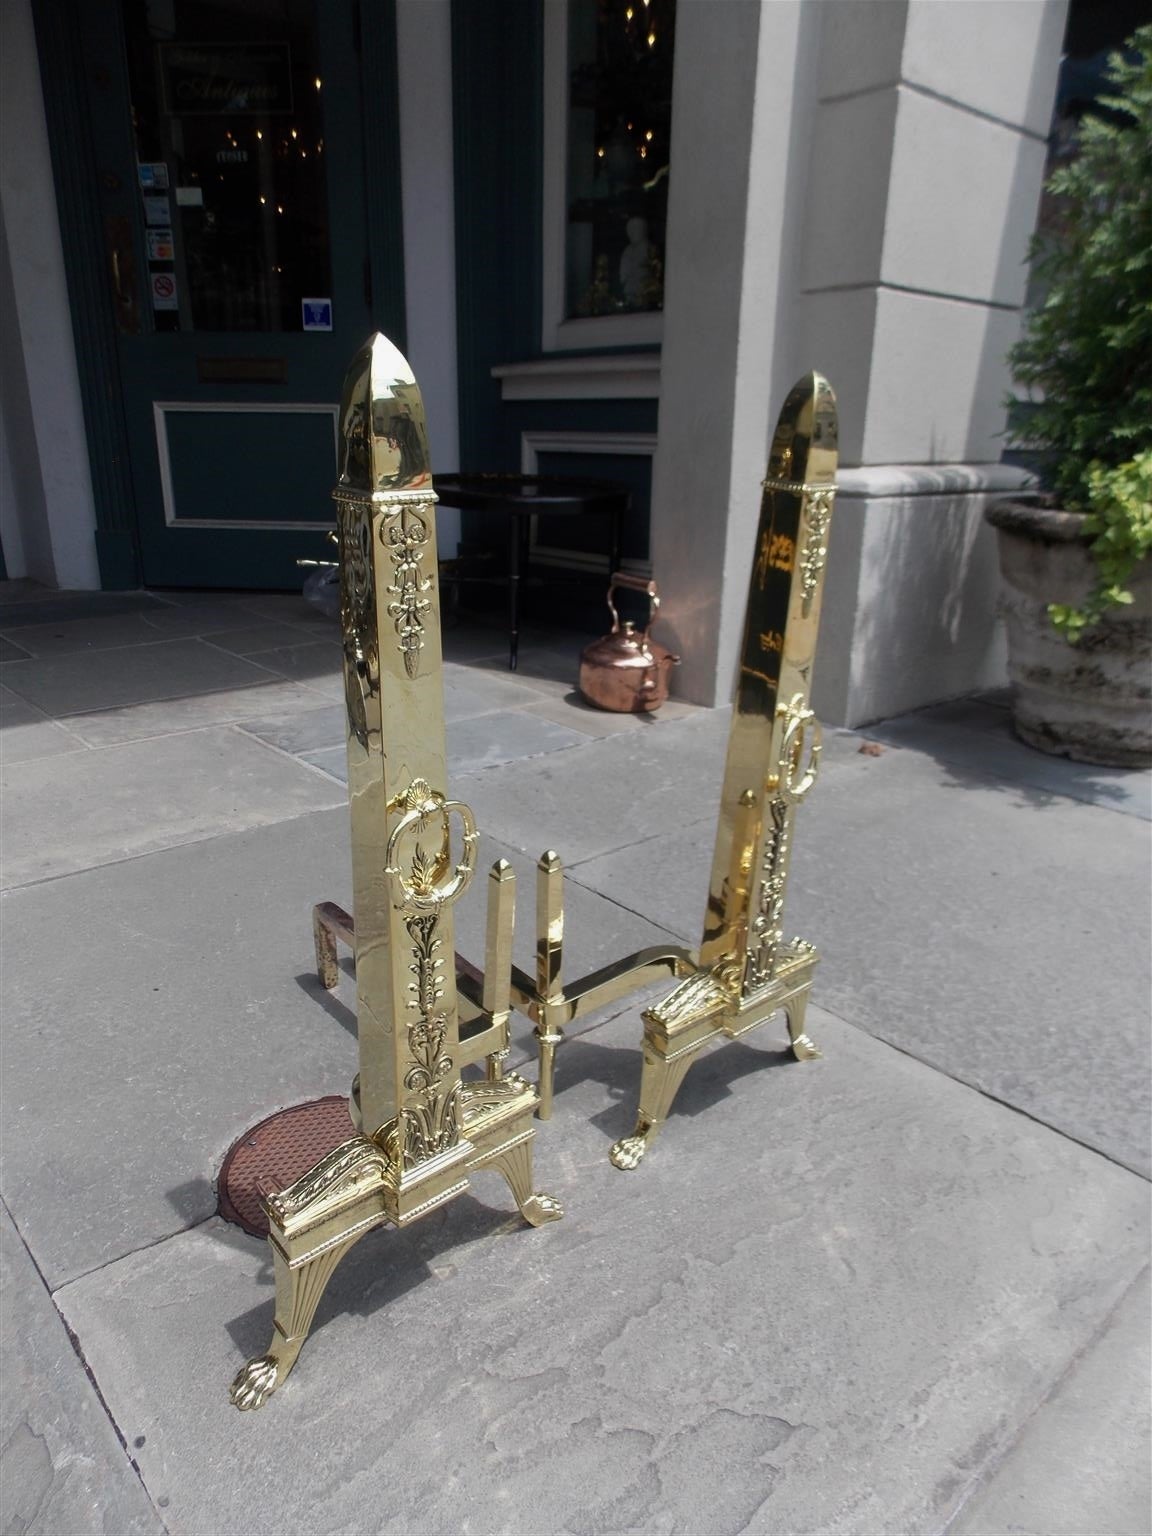 Pair of Monumental French brass obelisk andirons with decorative bead work, floral filigree, centered decorative rings, matching log stops, and terminating on acanthus scrolled fluted legs with lions paw feet.  Early 19th Century